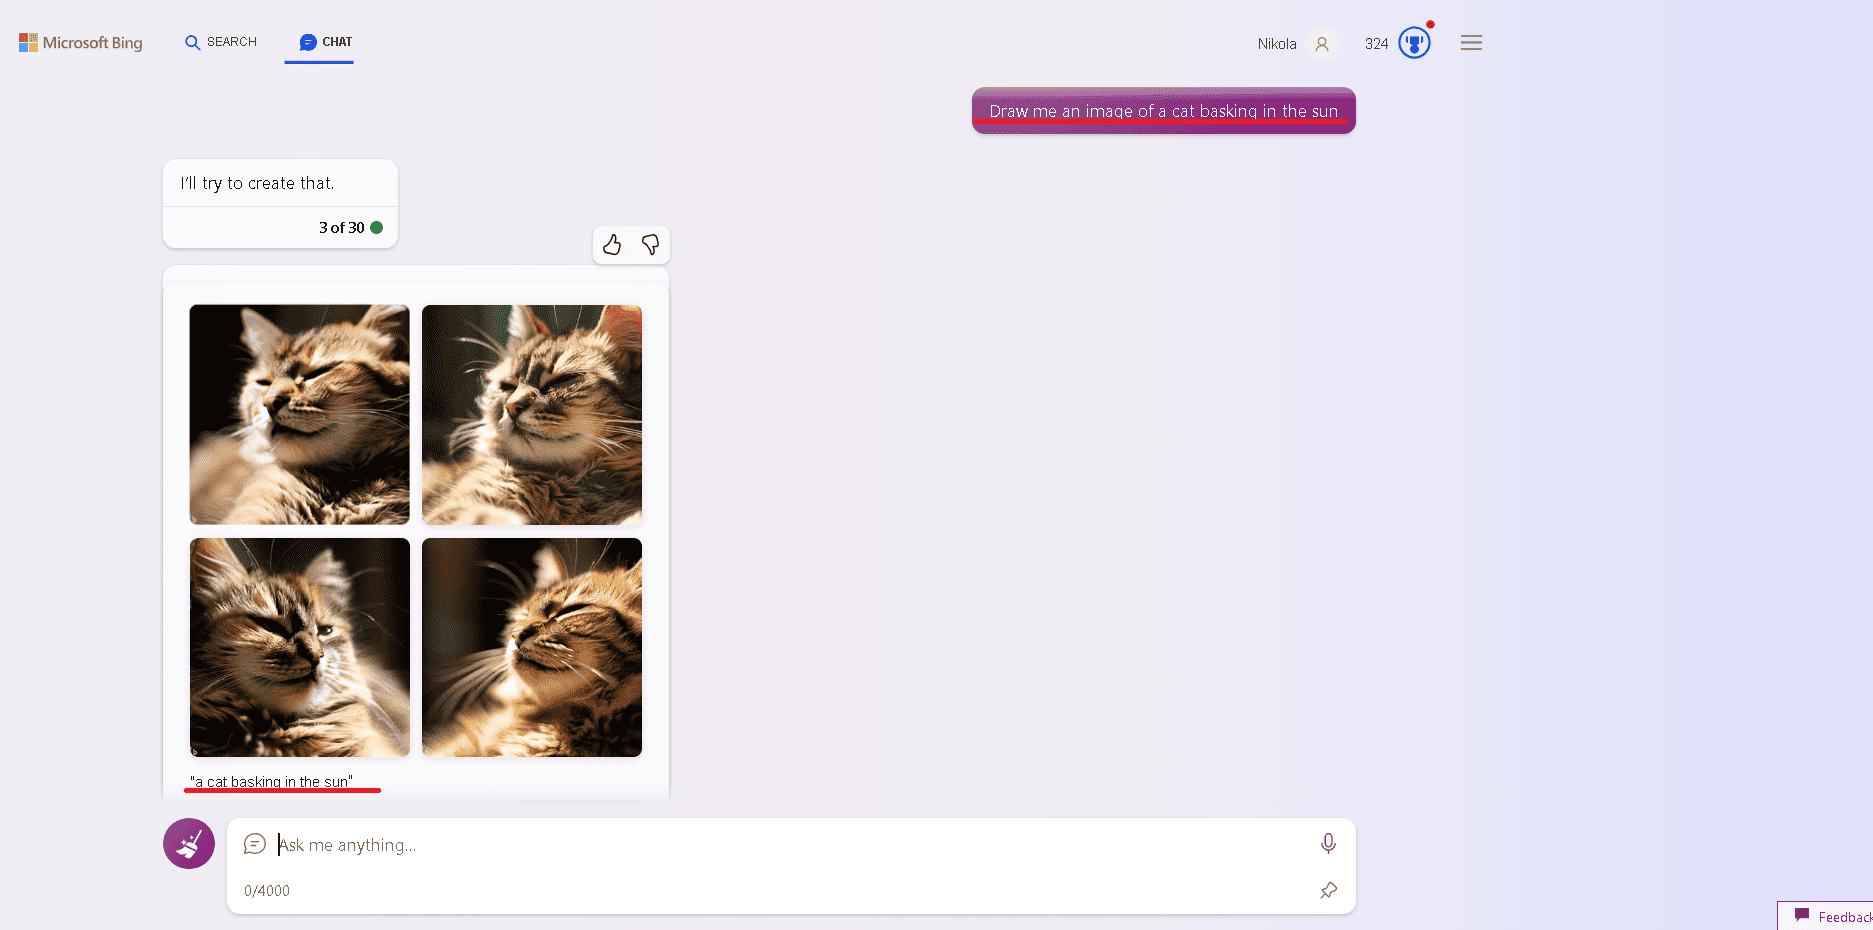 Bing Chat can create images for you. it made an image of a cat for me.